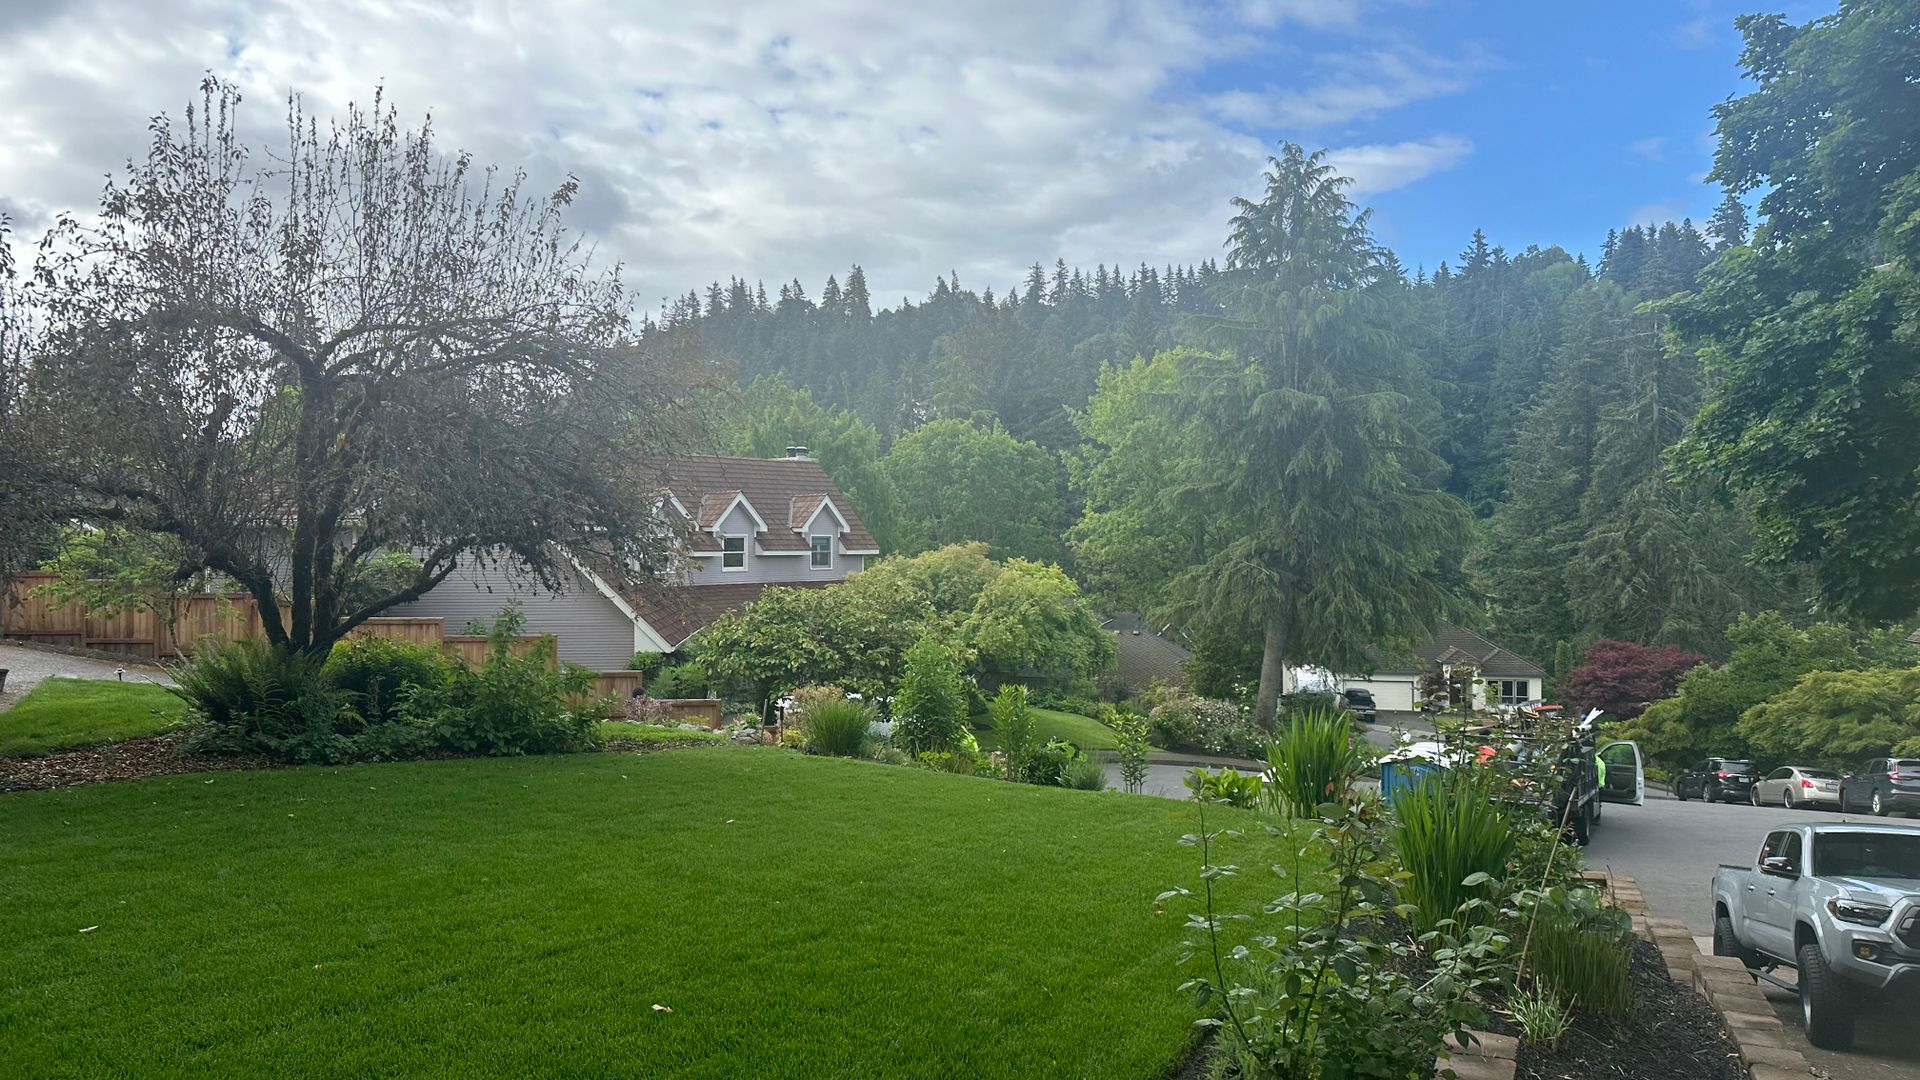 Exquisite 3 Bedroom, 3 Bath Home for Rent in Coveted West Linn, views! Pets OK - walkthrough video